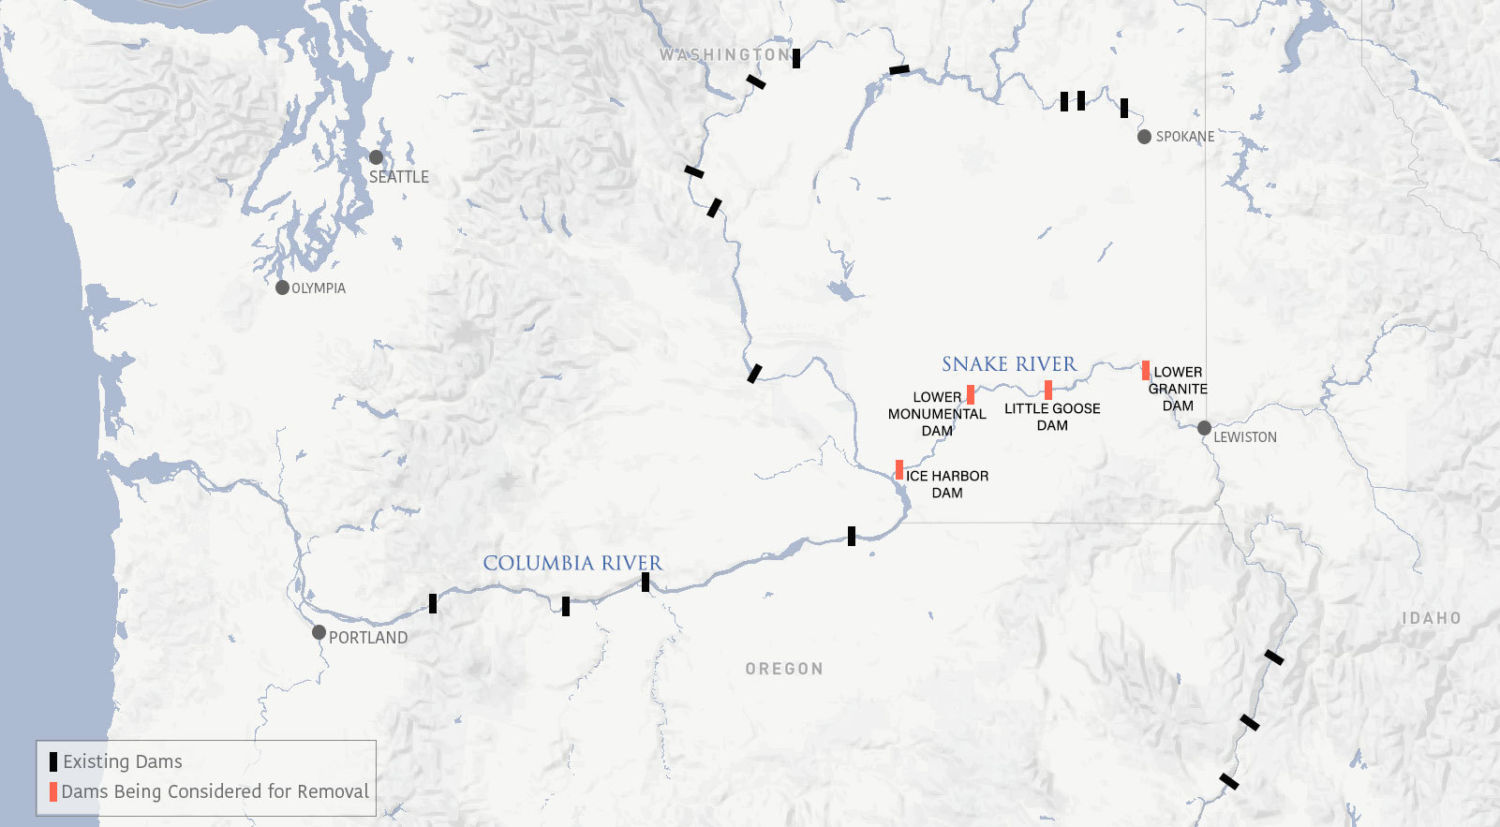 Columbia River Dams Map On The Northwest's Snake River, The Case For Dam Removal Grows - Yale E360